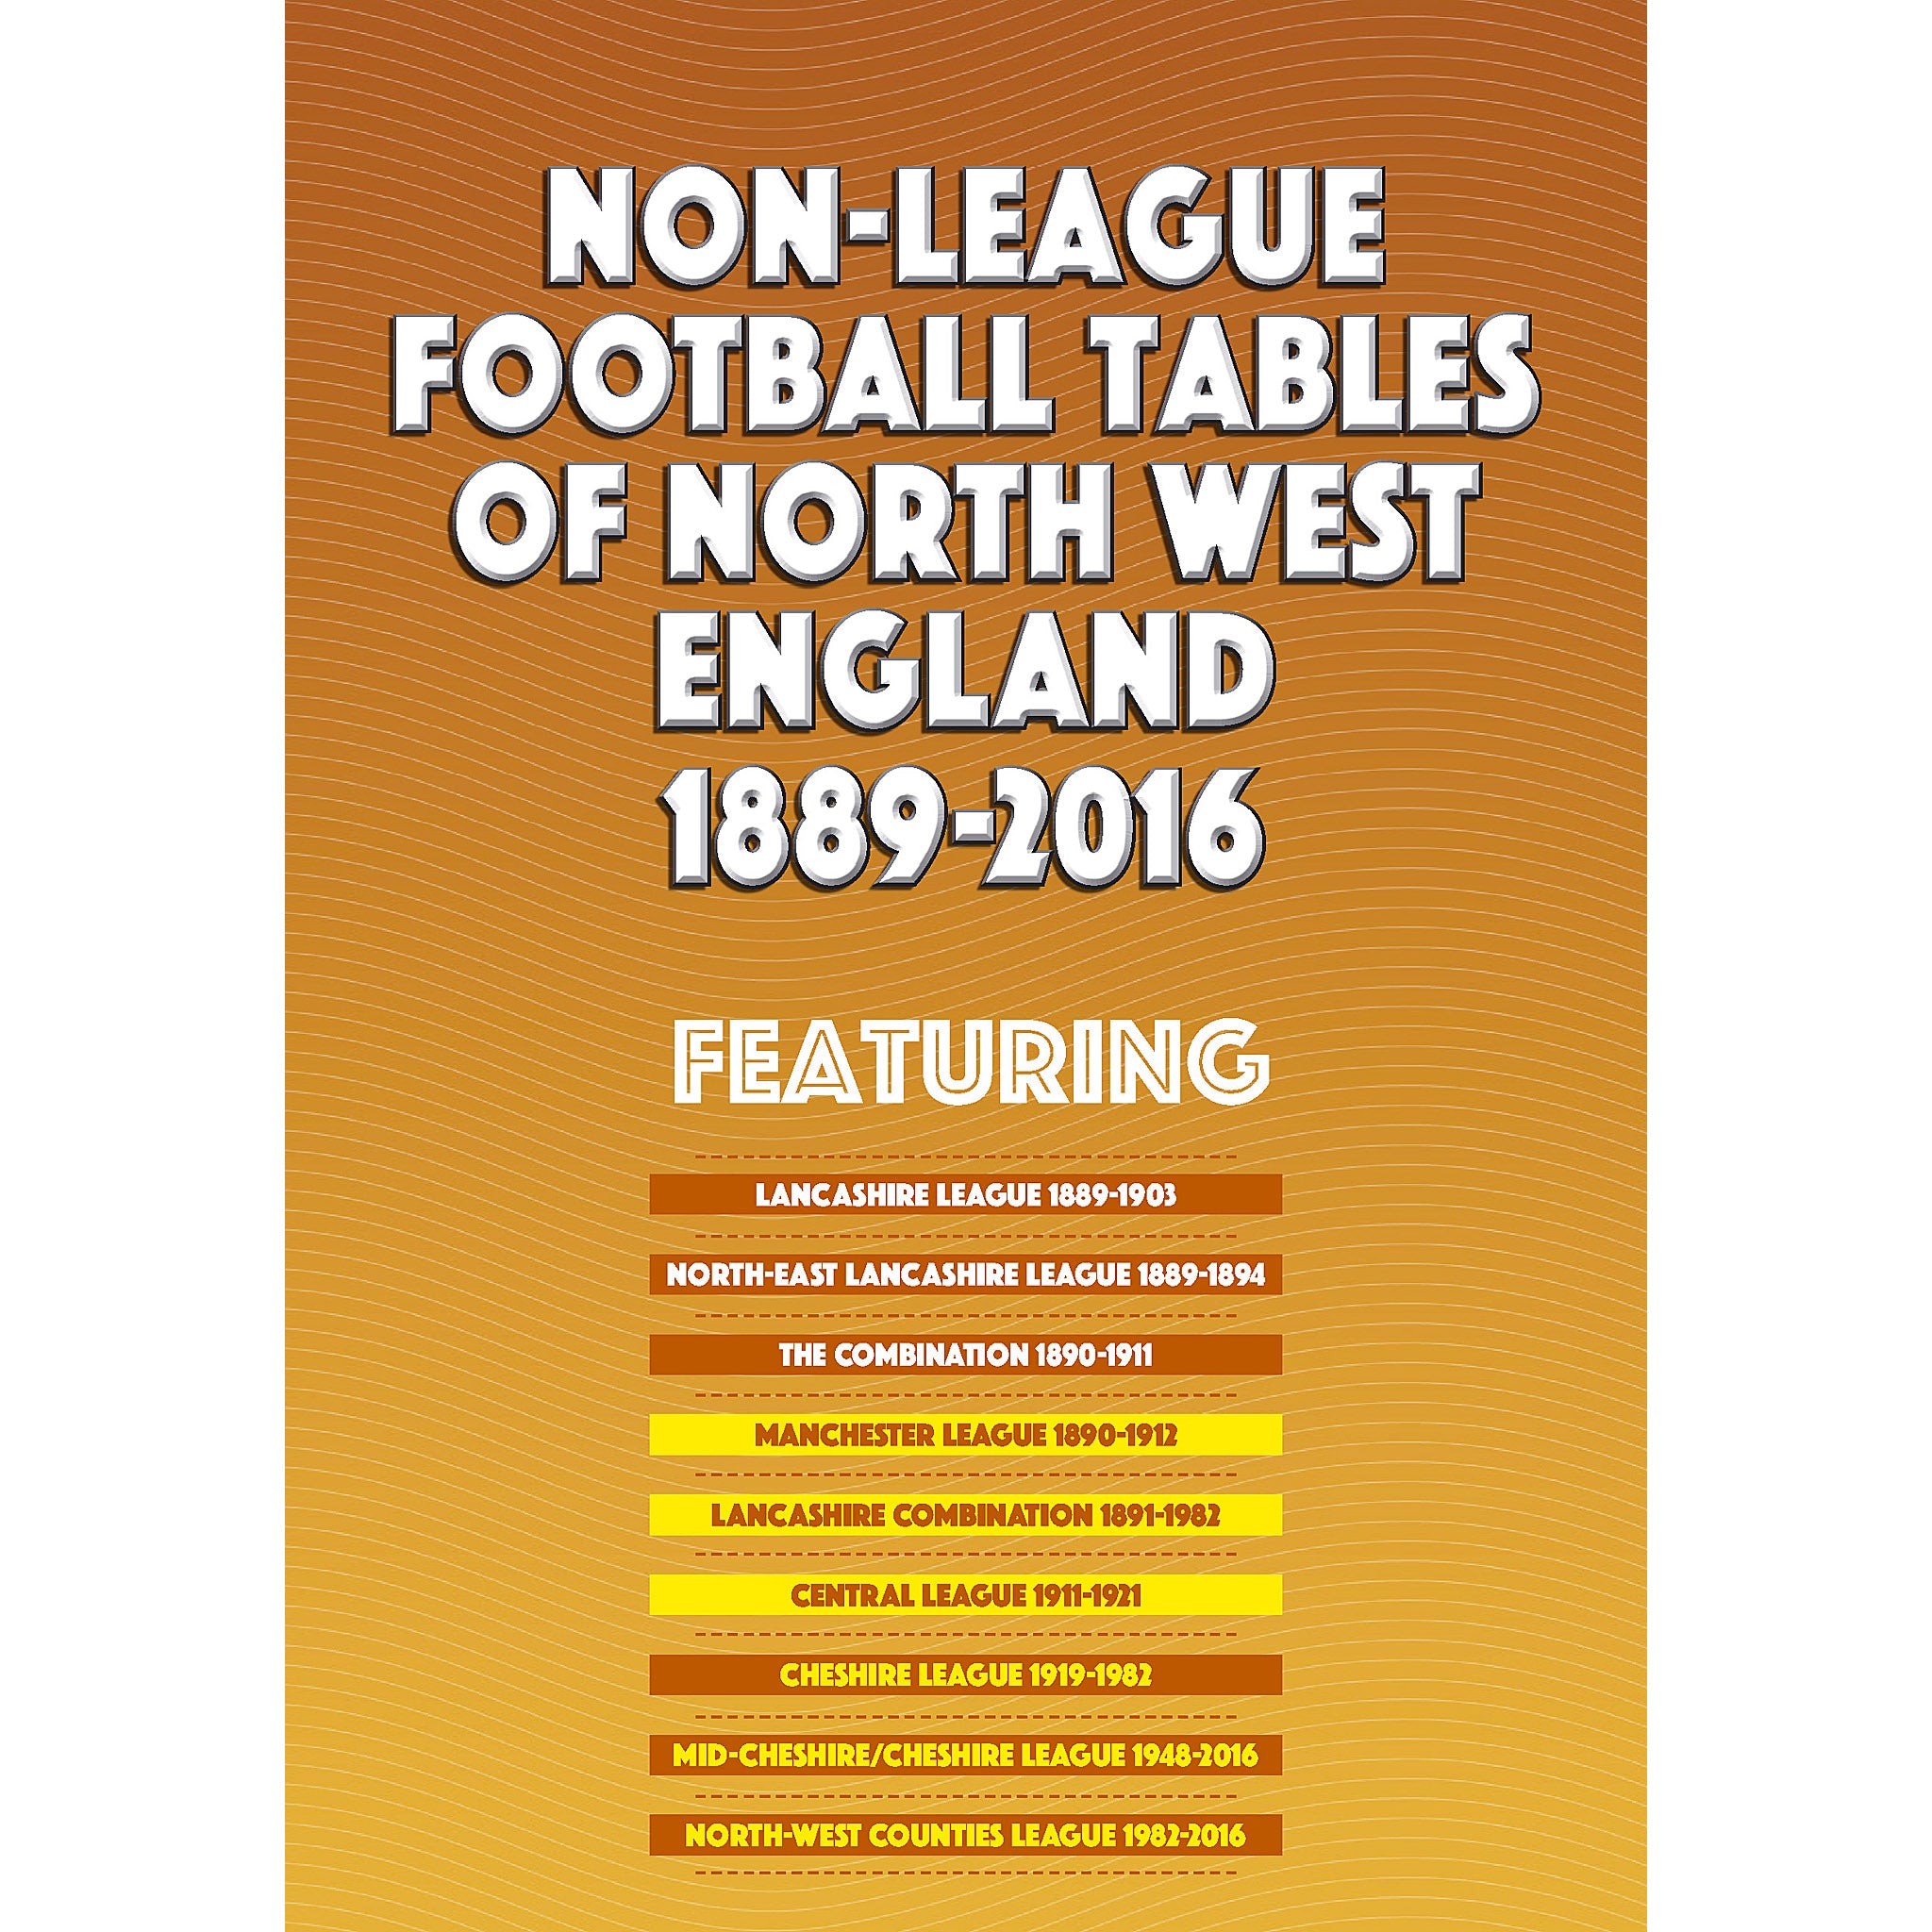 Non-League Football Tables of North West England 1889-2016